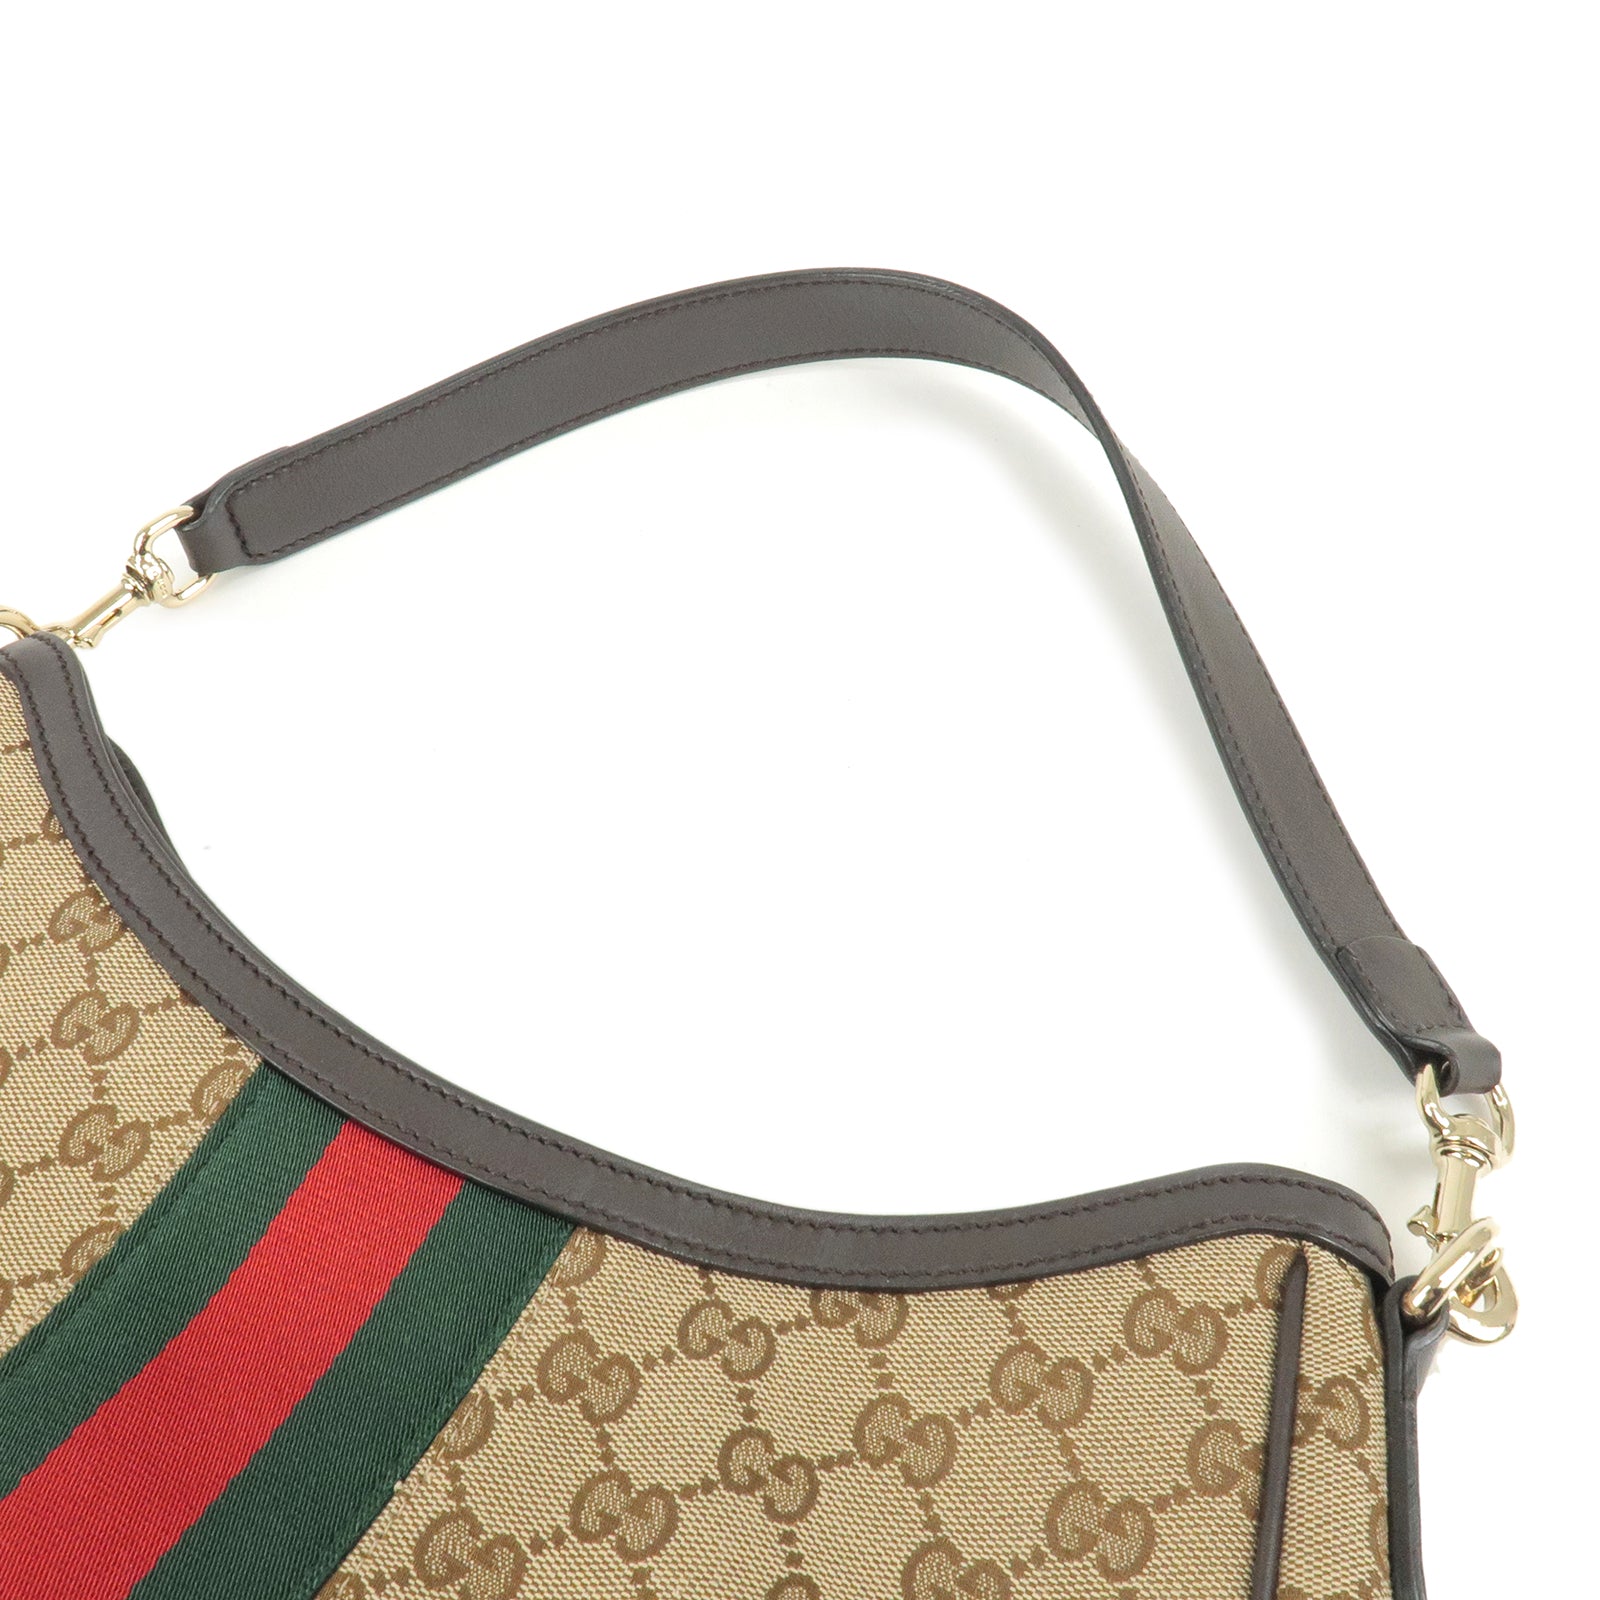 Authenticated Used GUCCI Gucci Sherry Line Shoulder Bag 181092 GG Canvas  Leather Beige Brown Diagonal Hanging 